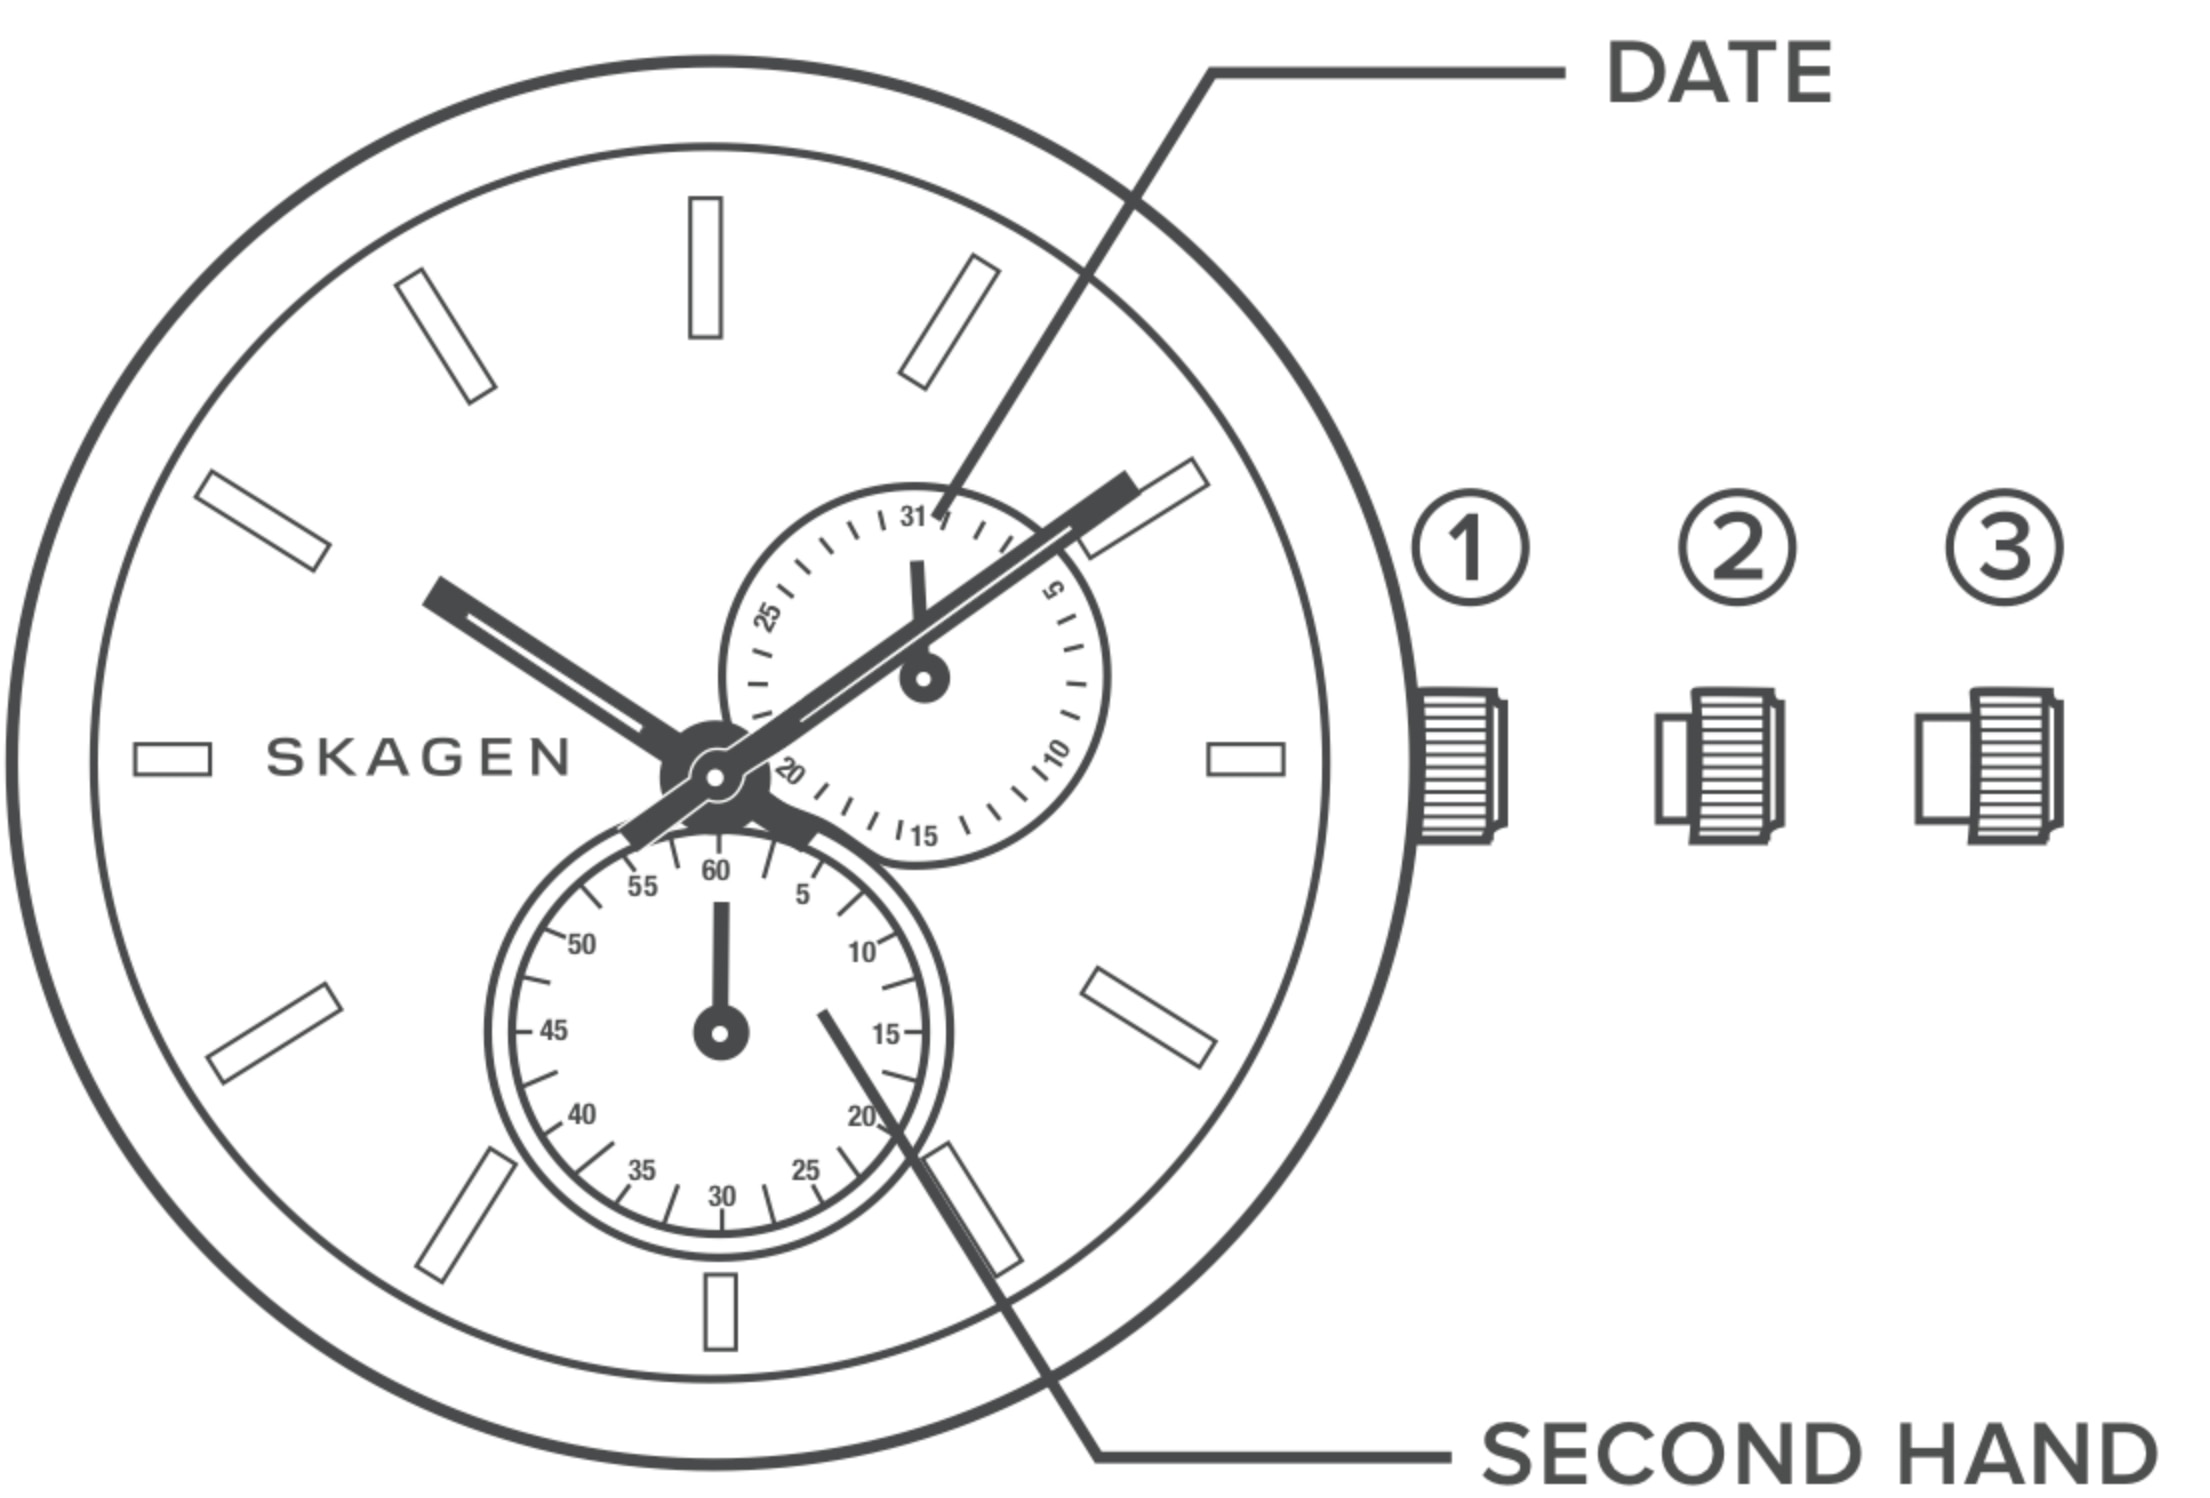 line art of a standard watch dial, identifying the crown, day and date